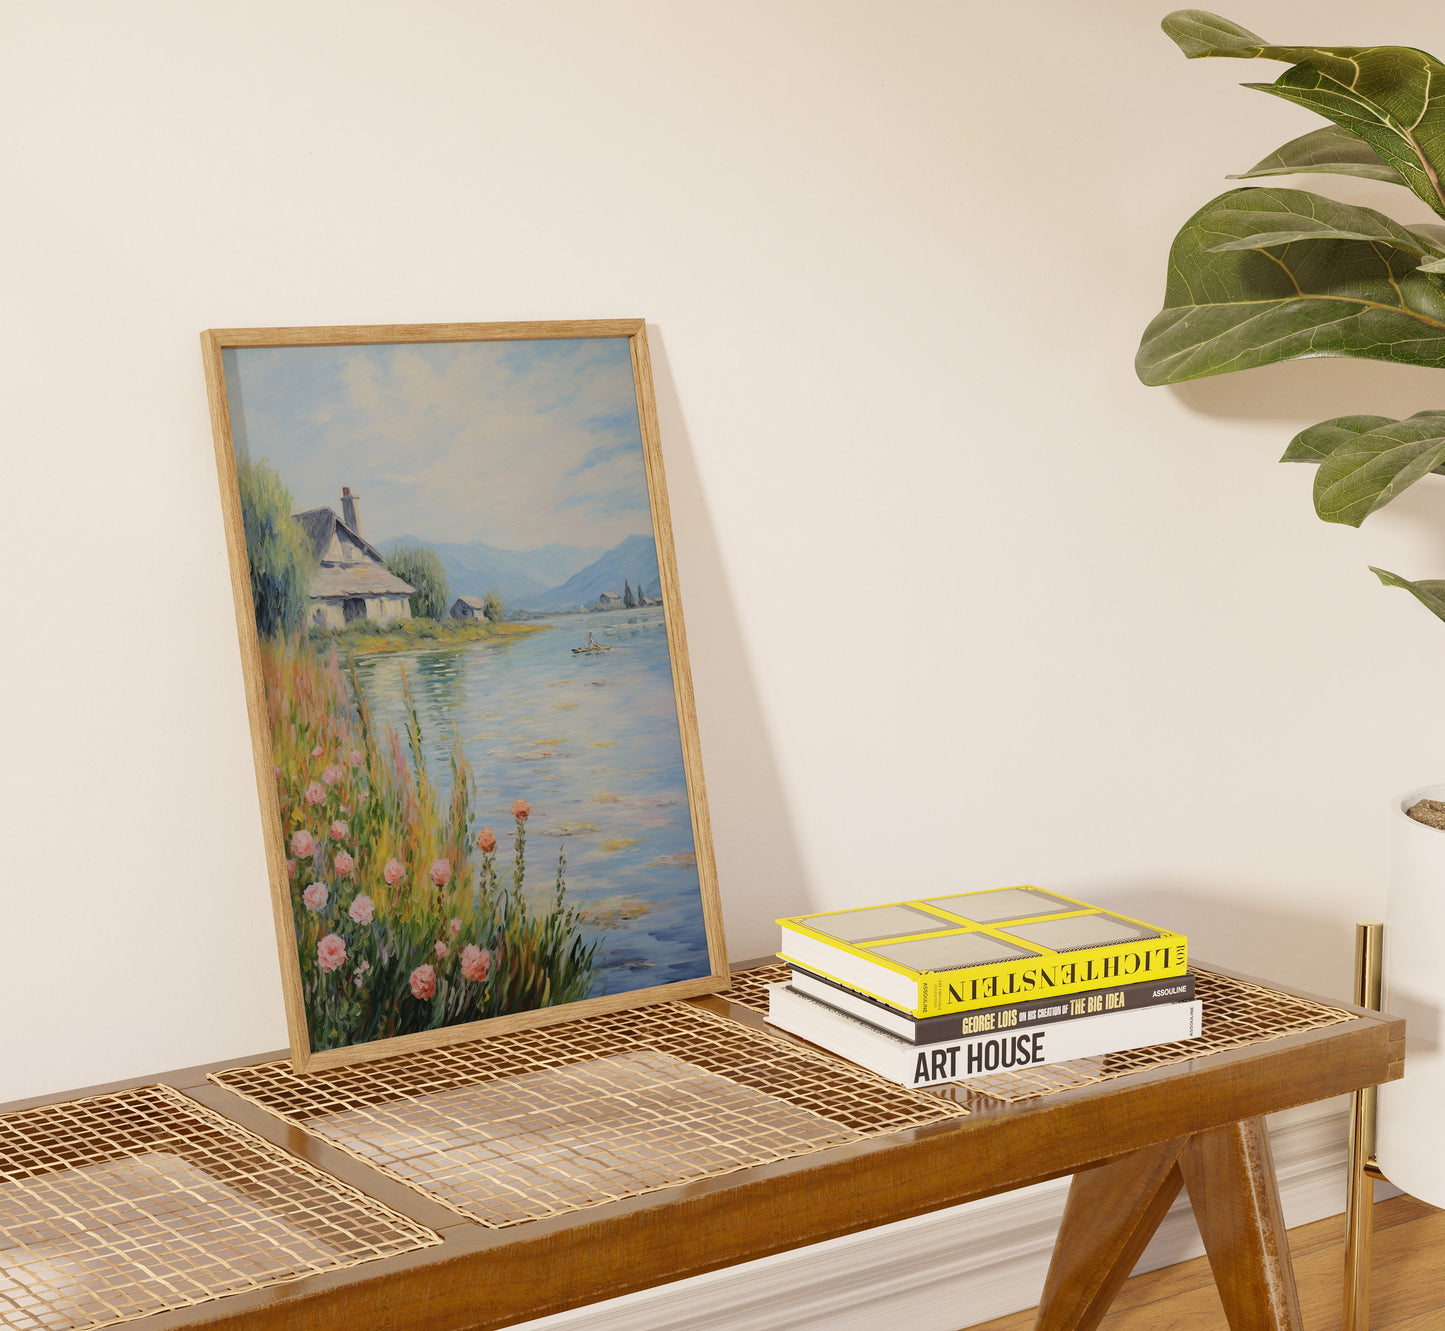 A framed landscape painting leaning against a wall above a table with books.